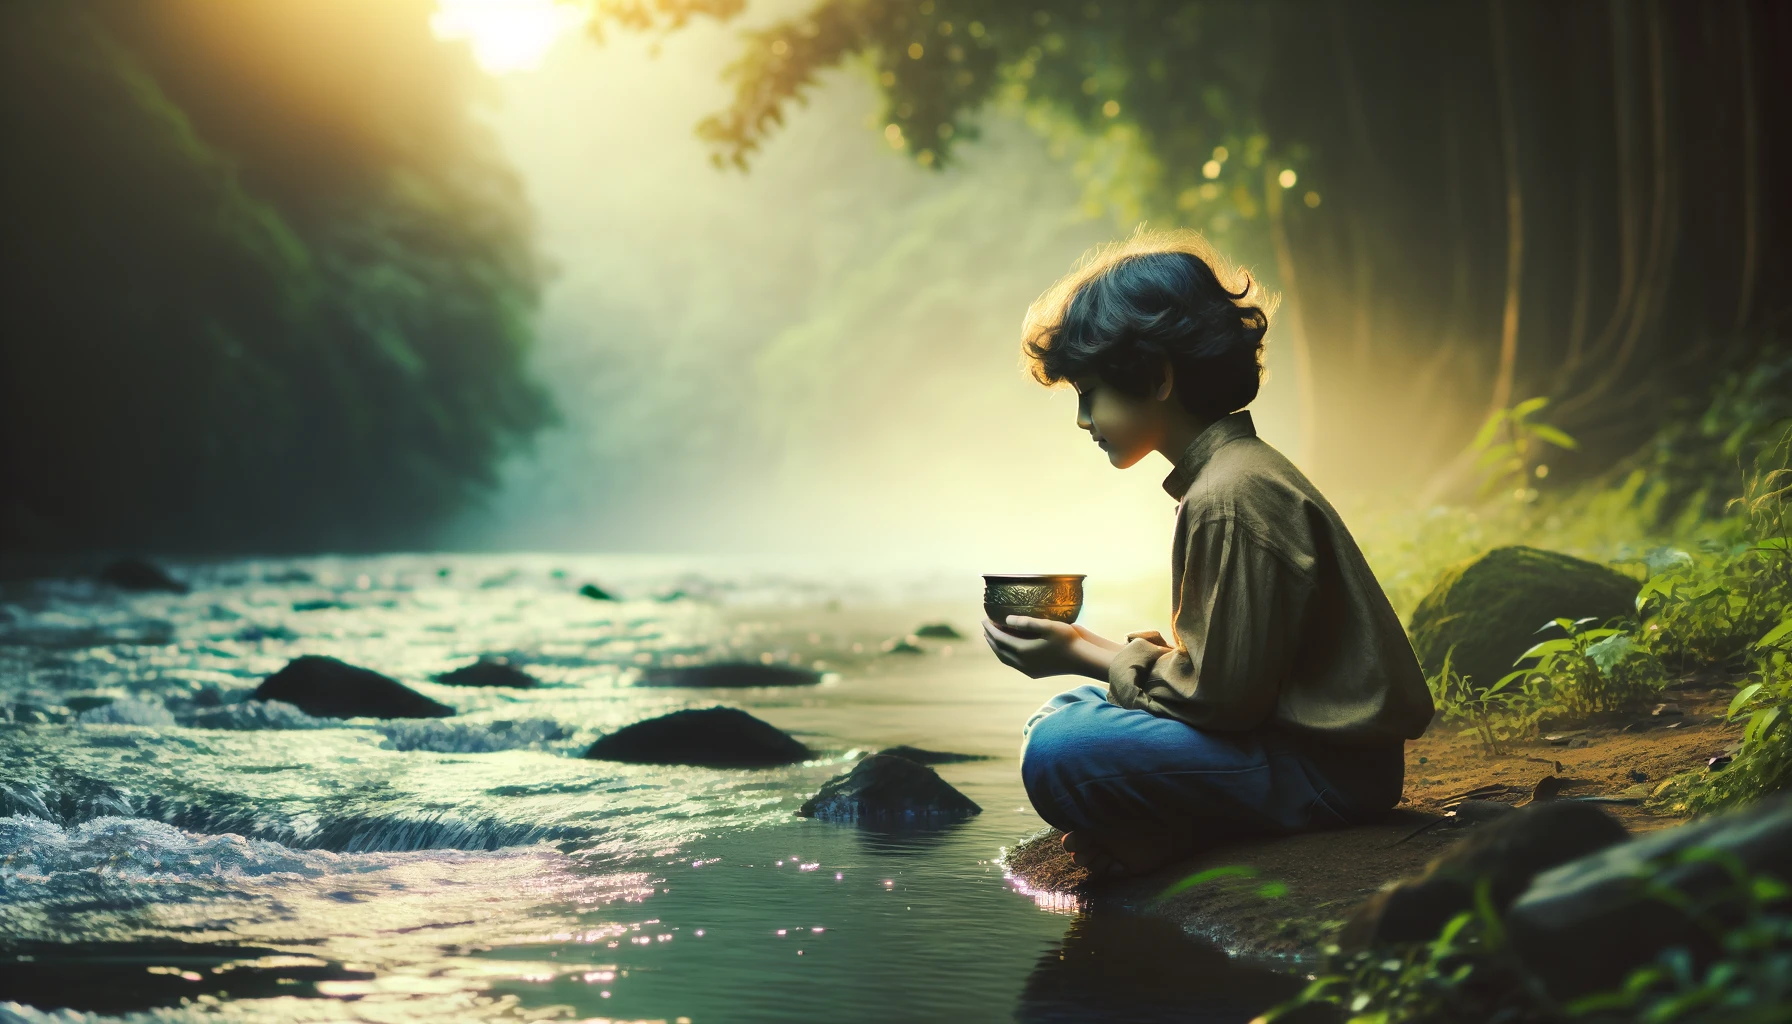 An image of a young person sitting cross legged by a calm flowing river. They are holding a golden cup gazing at it with curiosity and wonder. The y